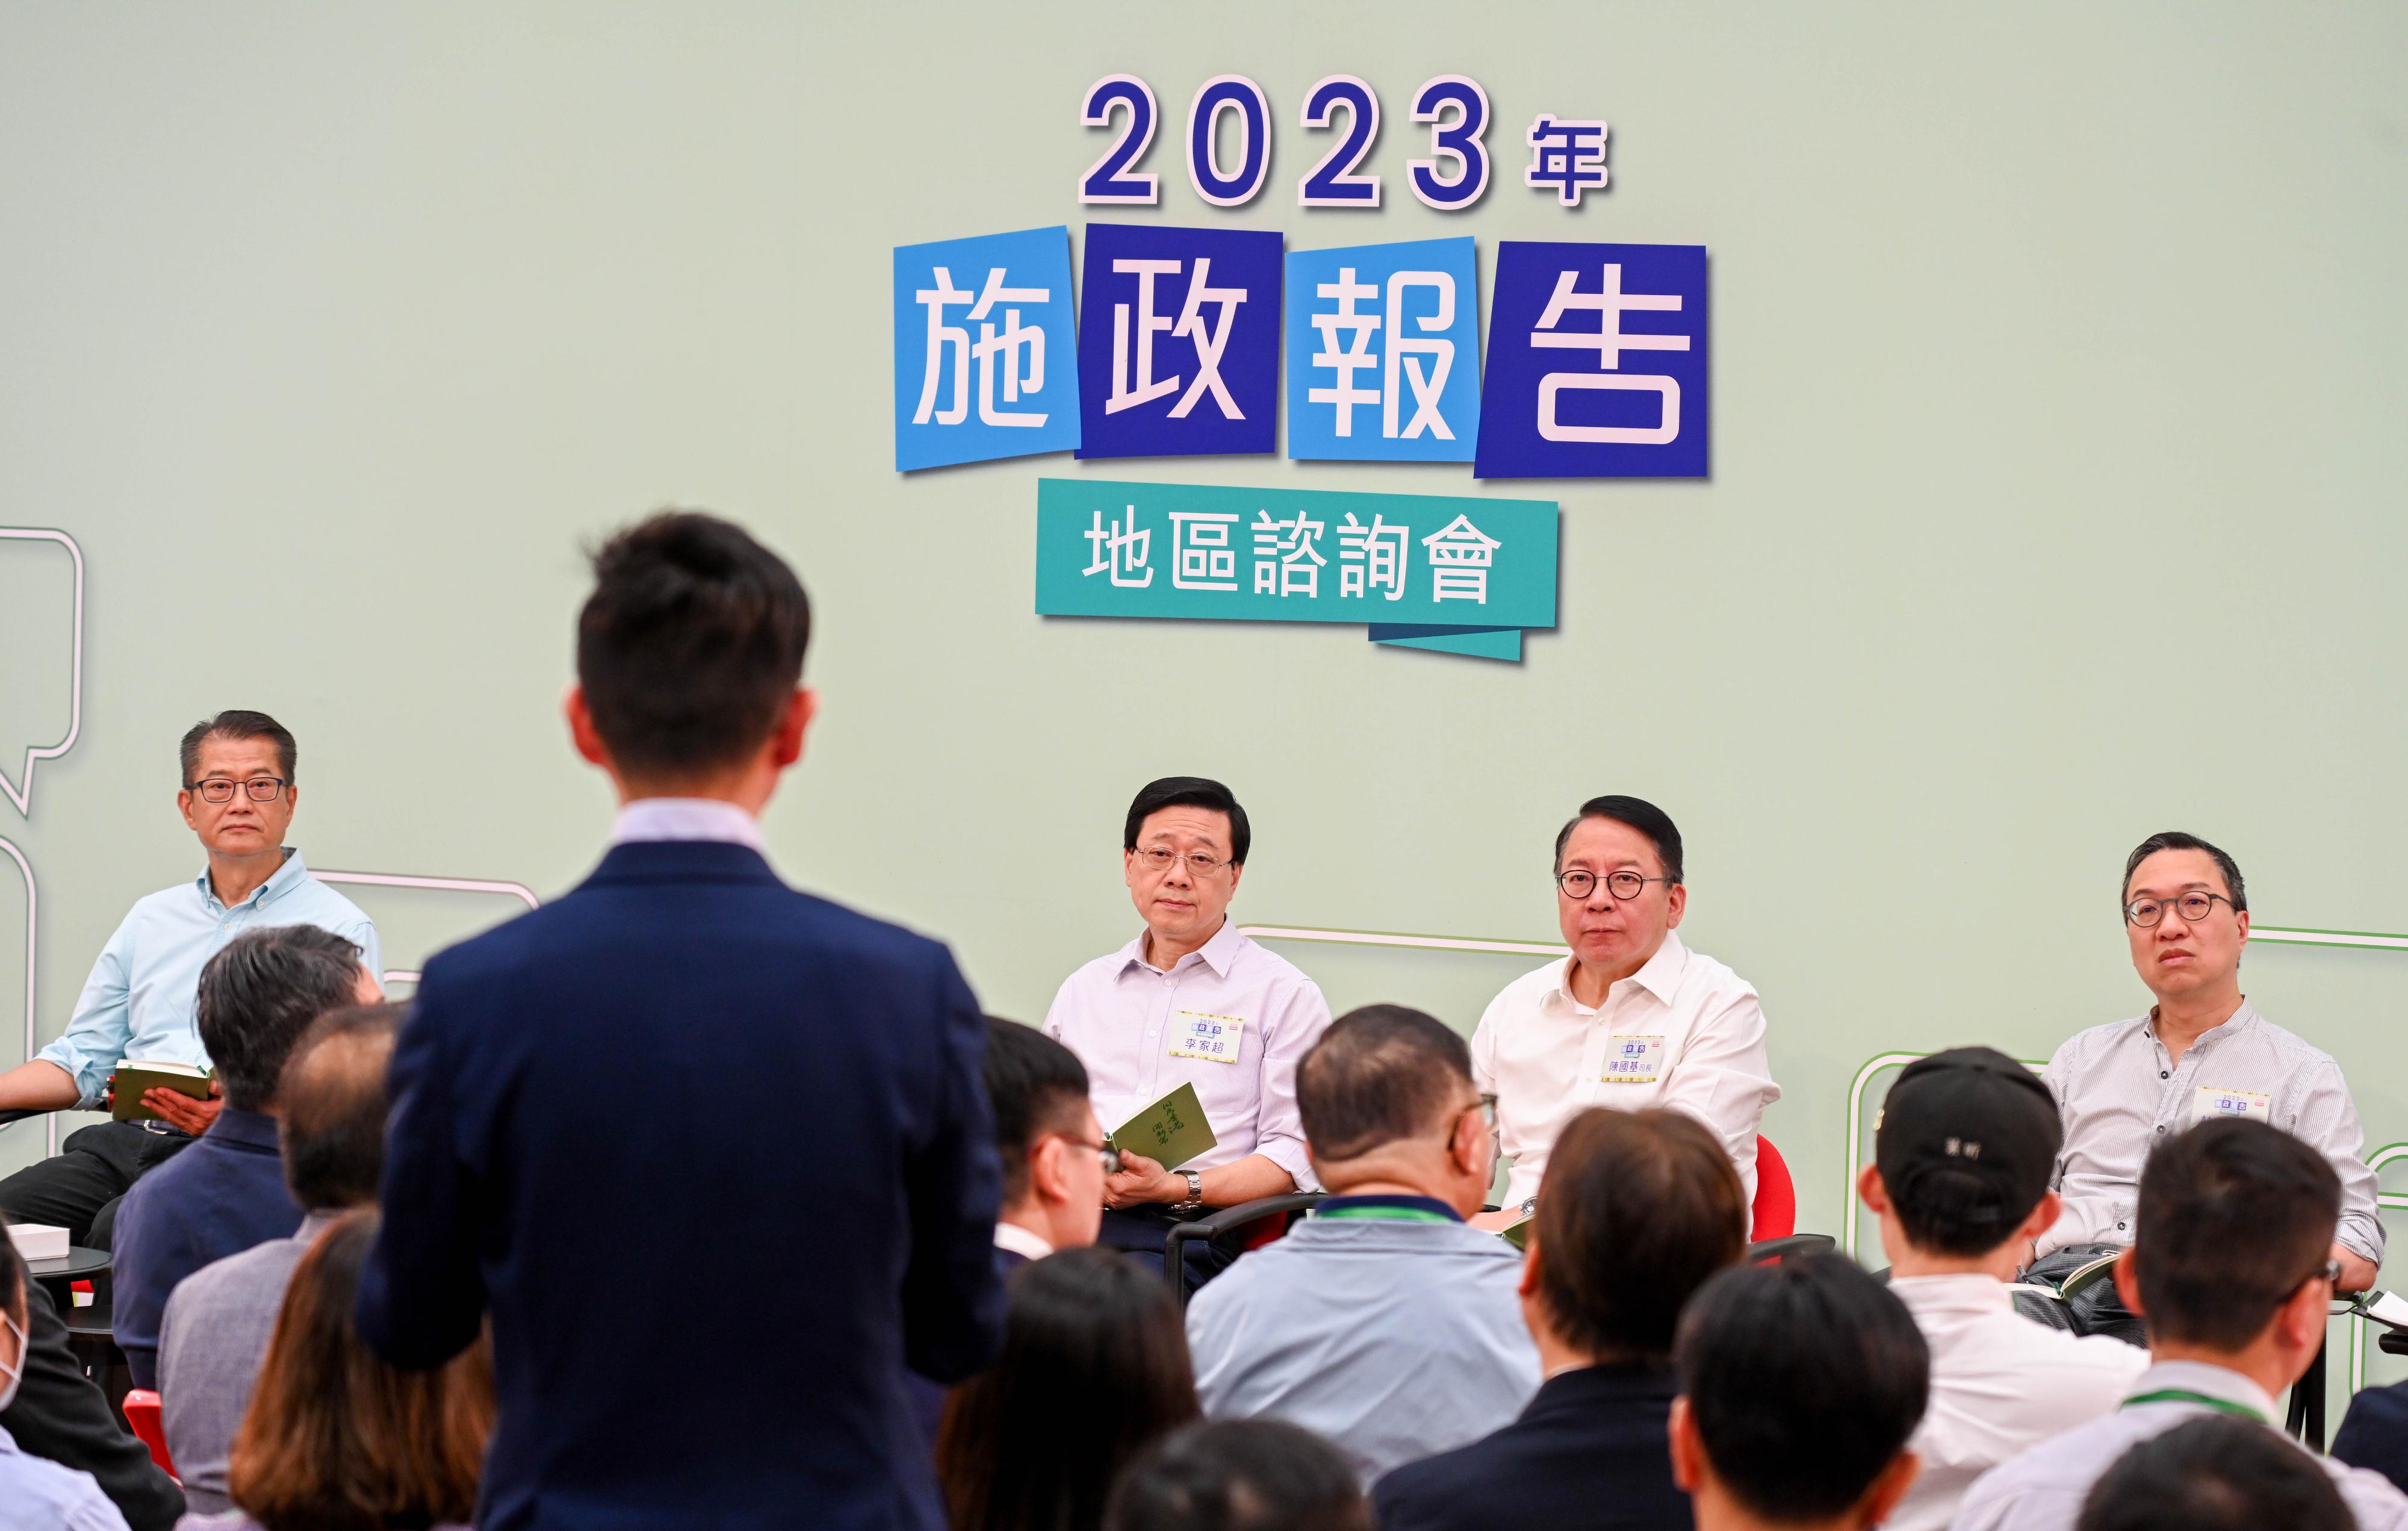 The Chief Executive, Mr John Lee, attended the second 2023 Policy Address District Forum with Principal Officials this morning (August 27) to listen to views and suggestions of local community members on the upcoming Policy Address. Photo shows Mr Lee (second left); the Chief Secretary for Administration, Mr Chan Kwok-ki (second right); the Financial Secretary, Mr Paul Chan (first left); and the Secretary for Justice, Mr Paul Lam, SC (first right), listening to views of the public at the consultation session.